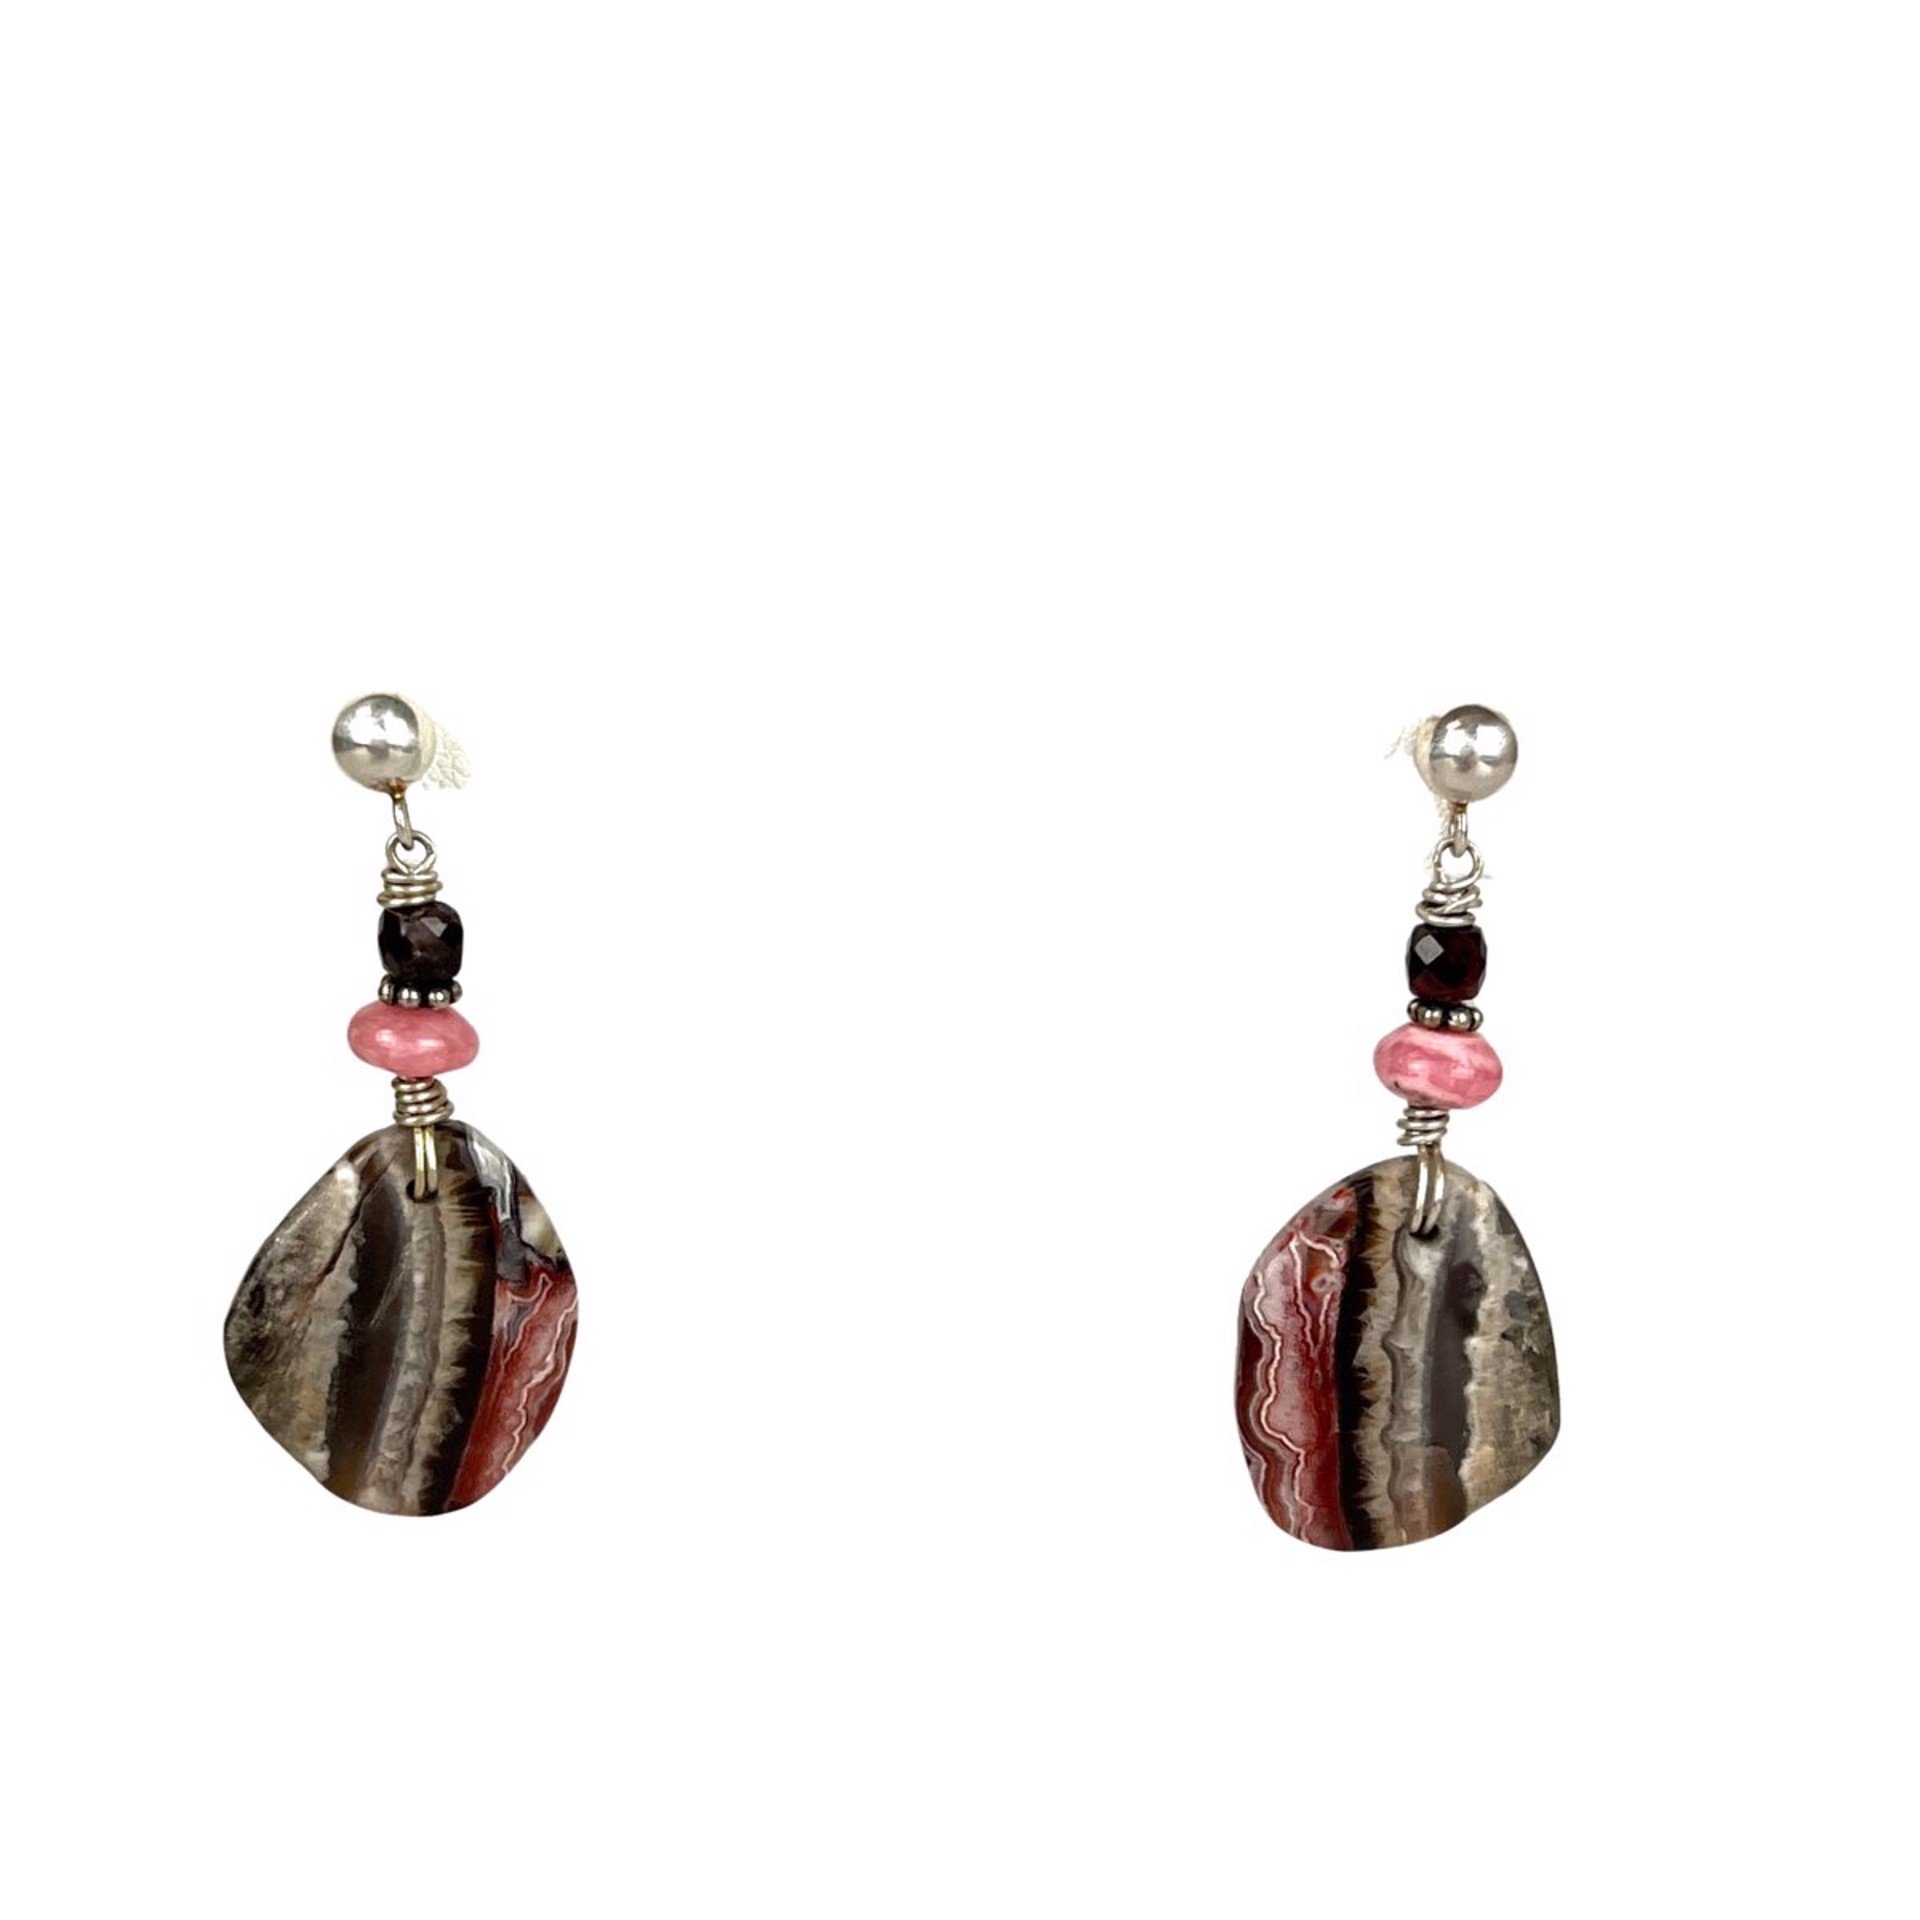 Crazy Lace Agate, Rhodocrosite, Garnet and Sterling Silver Earrings by Nola Smodic